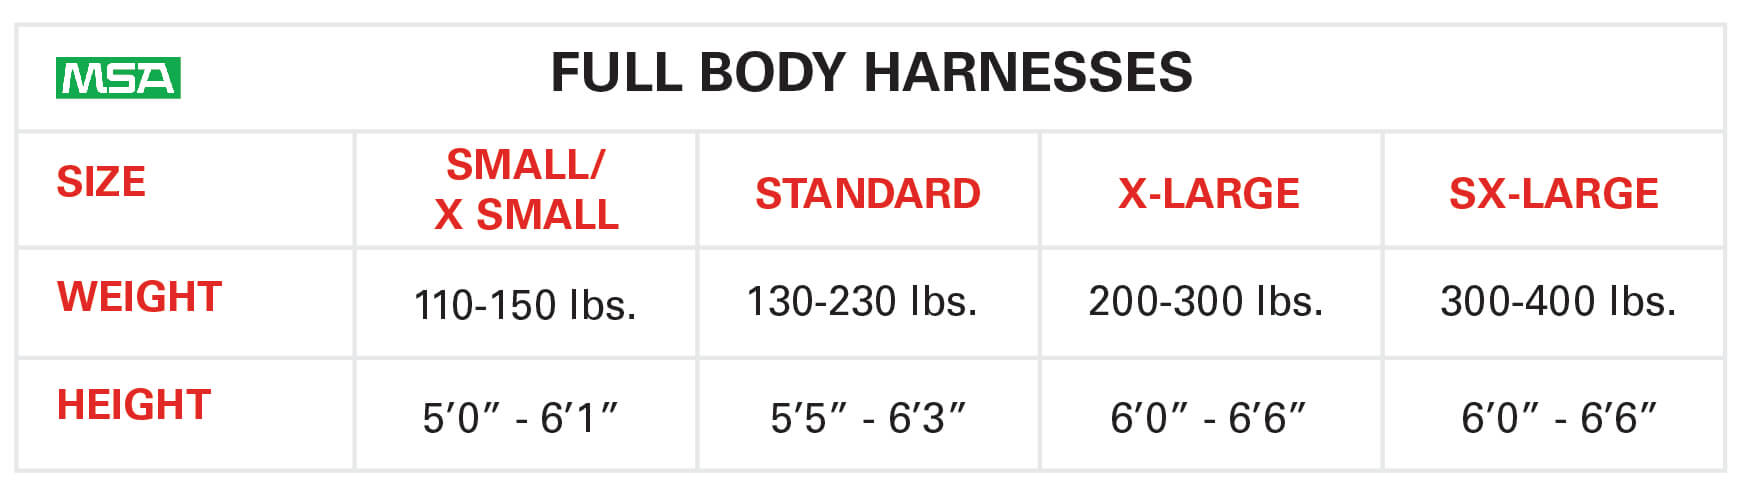 Harness Sizing Charts Gravitec Systems Inc. Fall